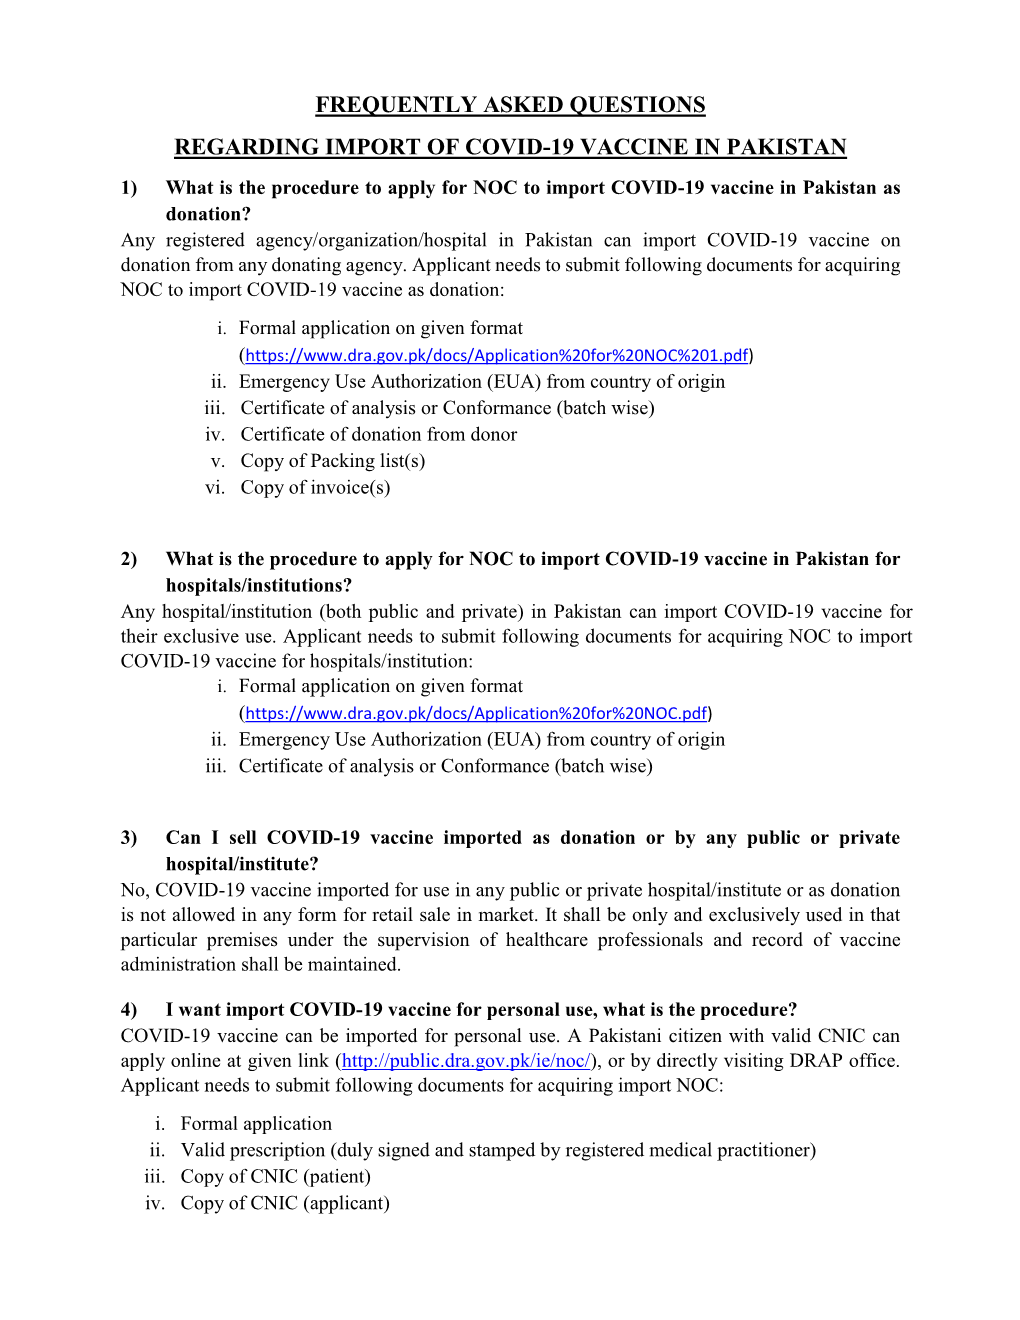 Frequently Asked Questions Regarding Import of Covid-19 Vaccine in Pakistan